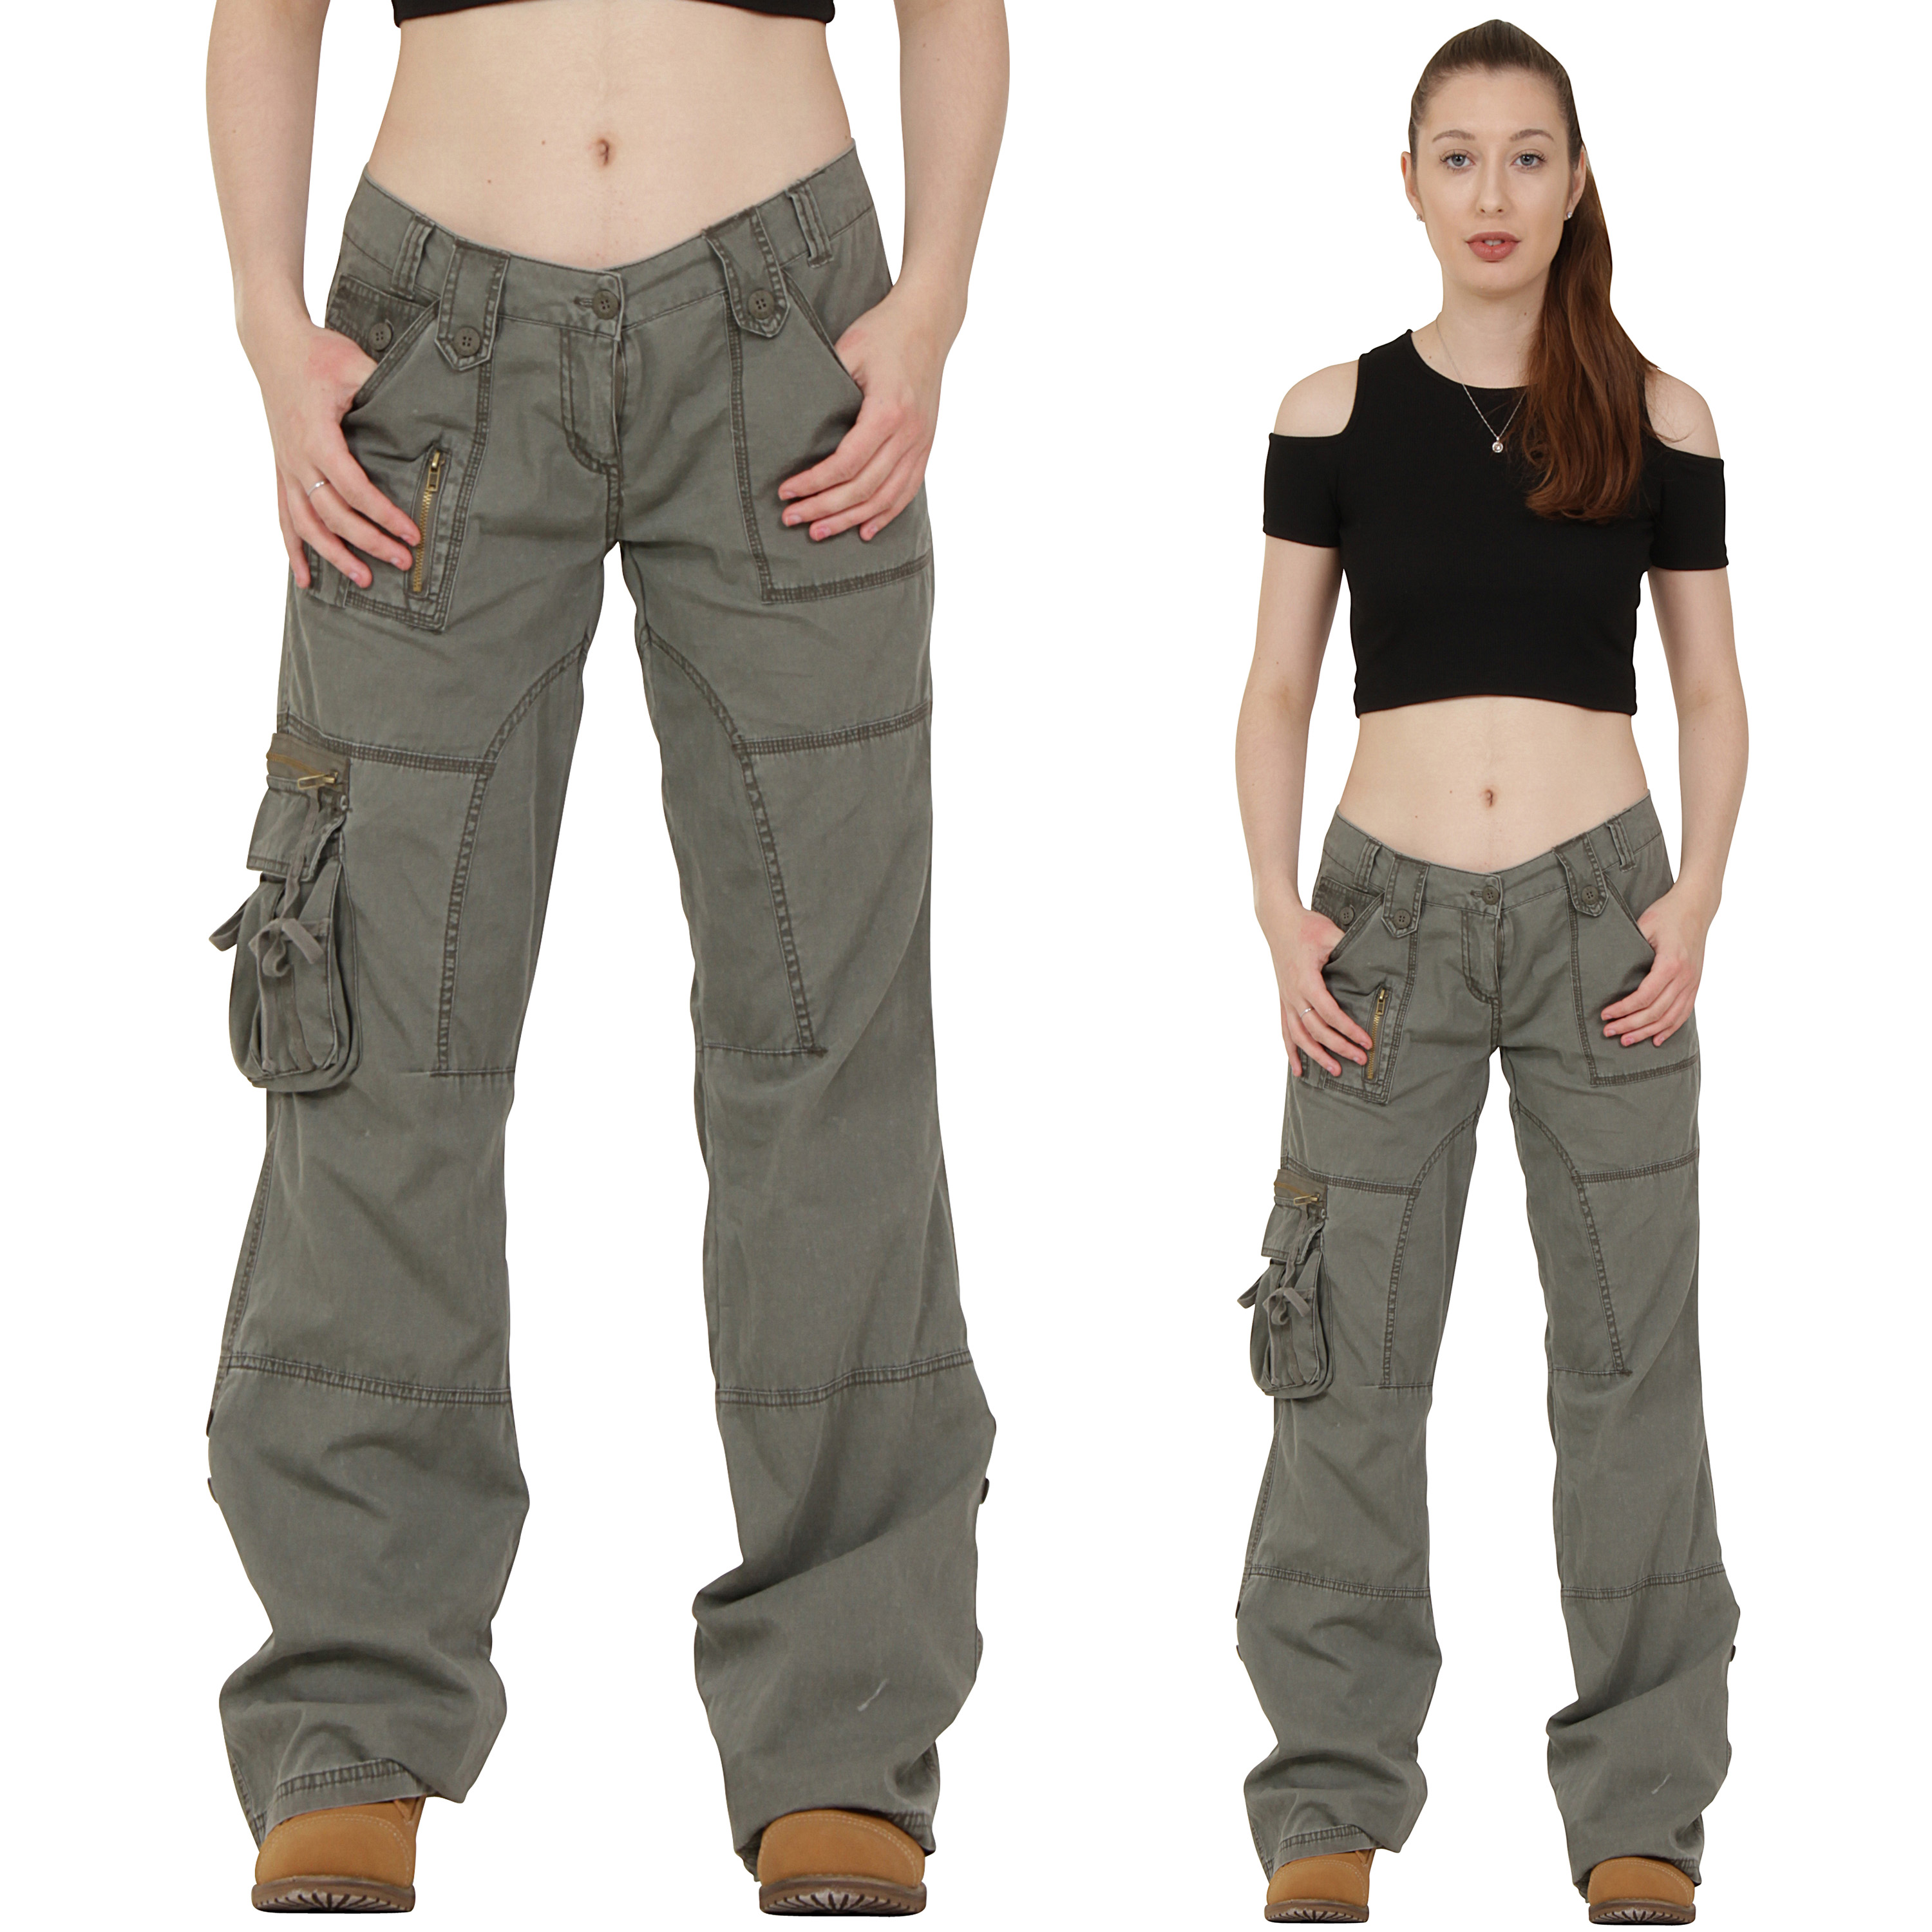 Women's Army Green Cargo Pants - Army Military